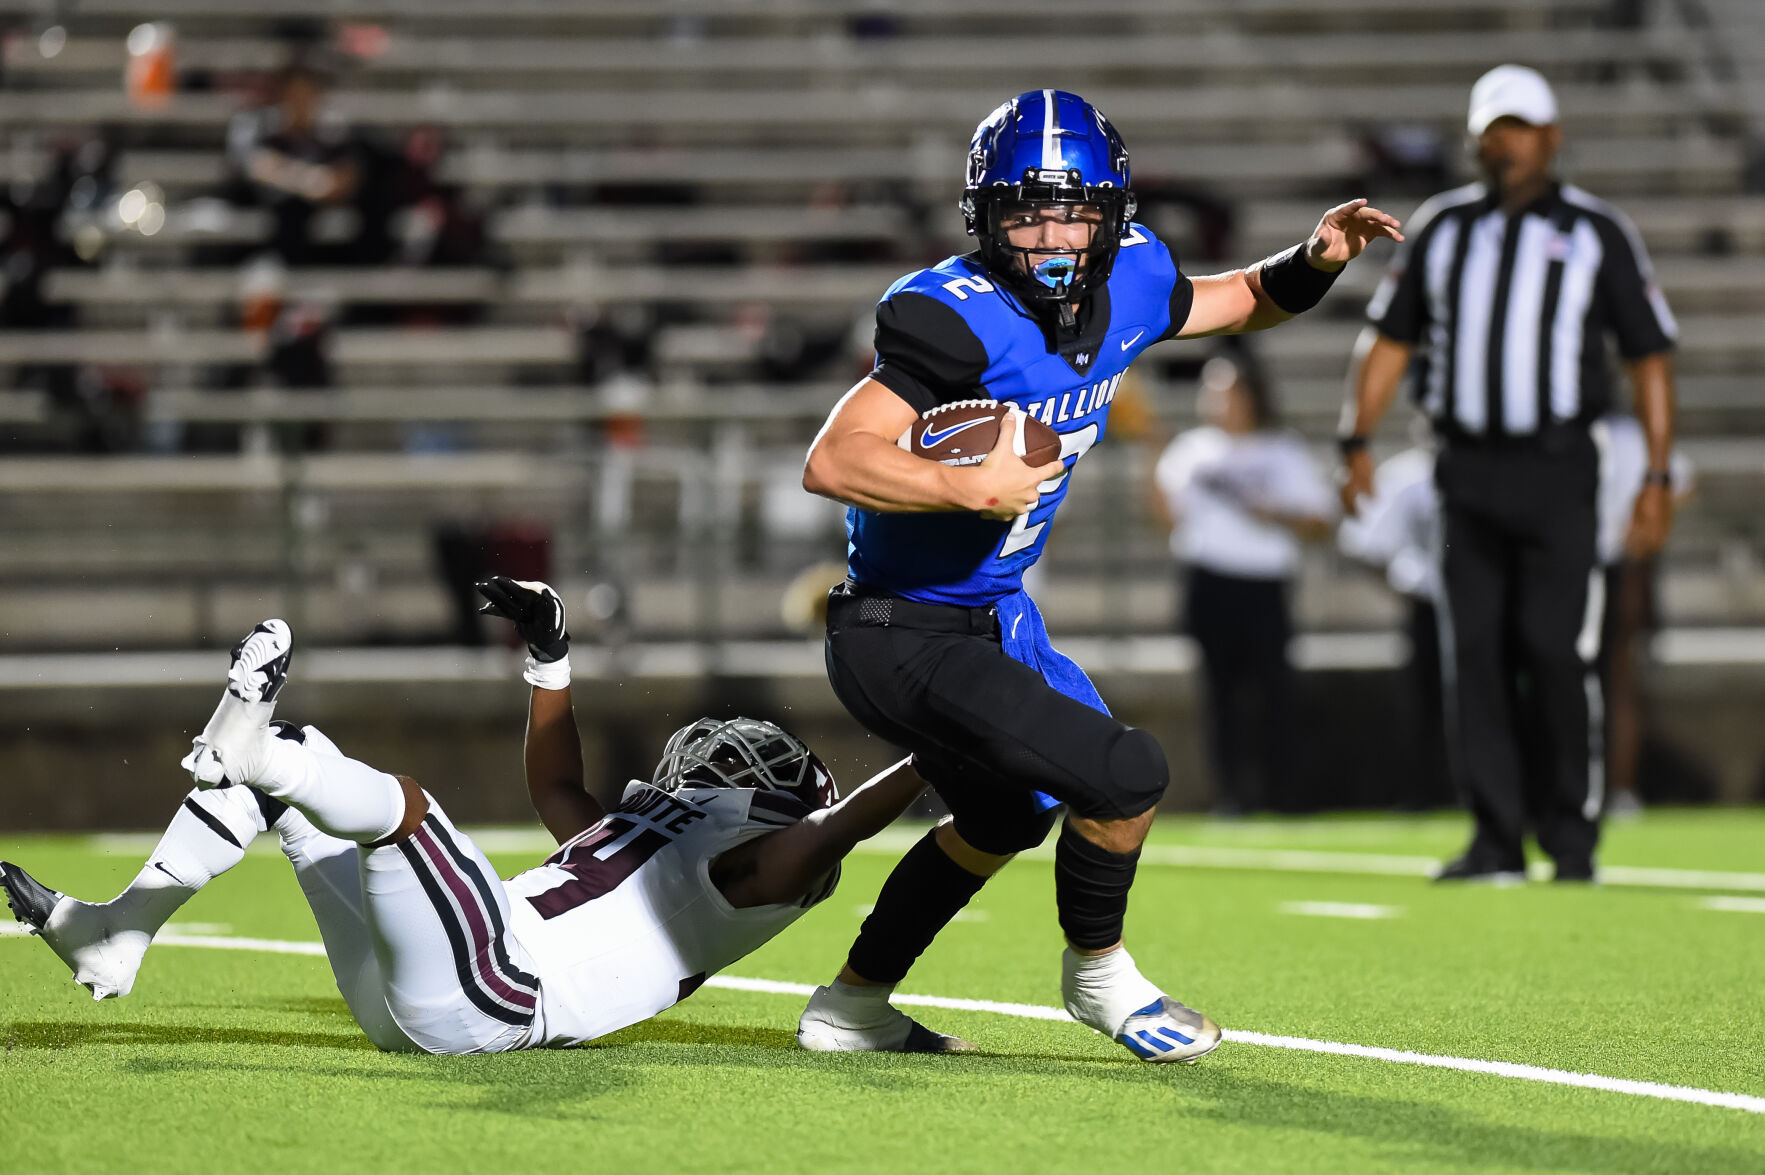 7-5A Division I Football: West Mesquite and North Mesquite Players Earn Honors, Longview Captures Championship